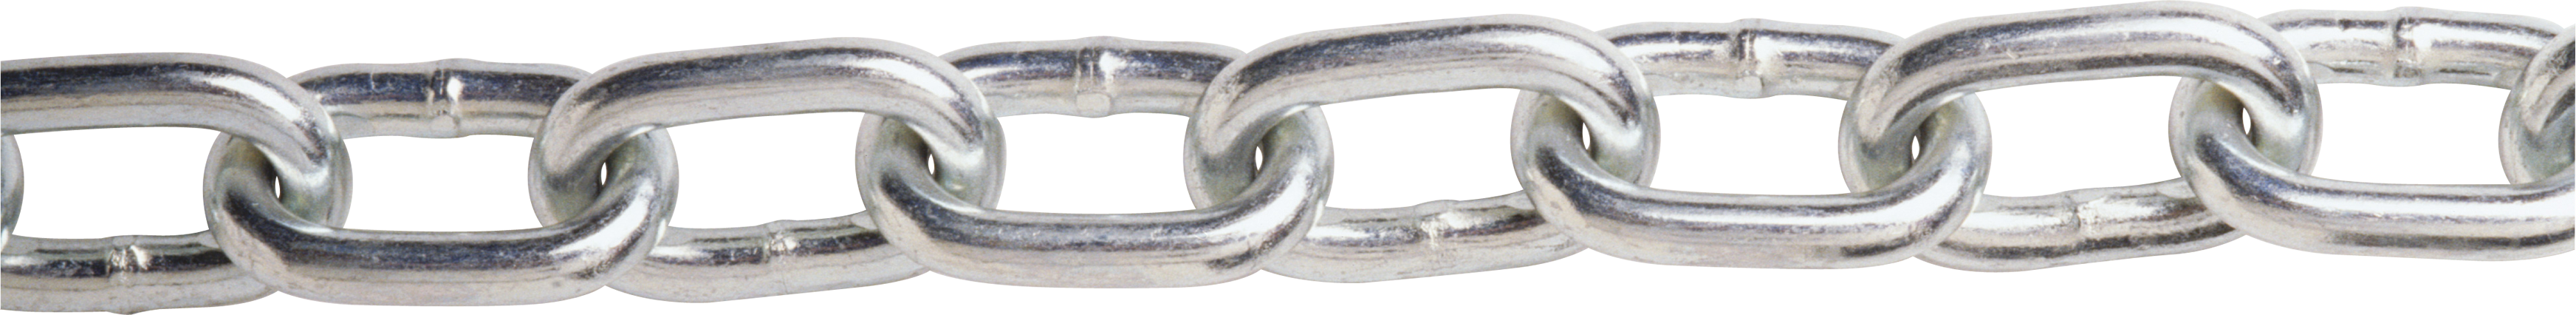 Chain PNG - 25218